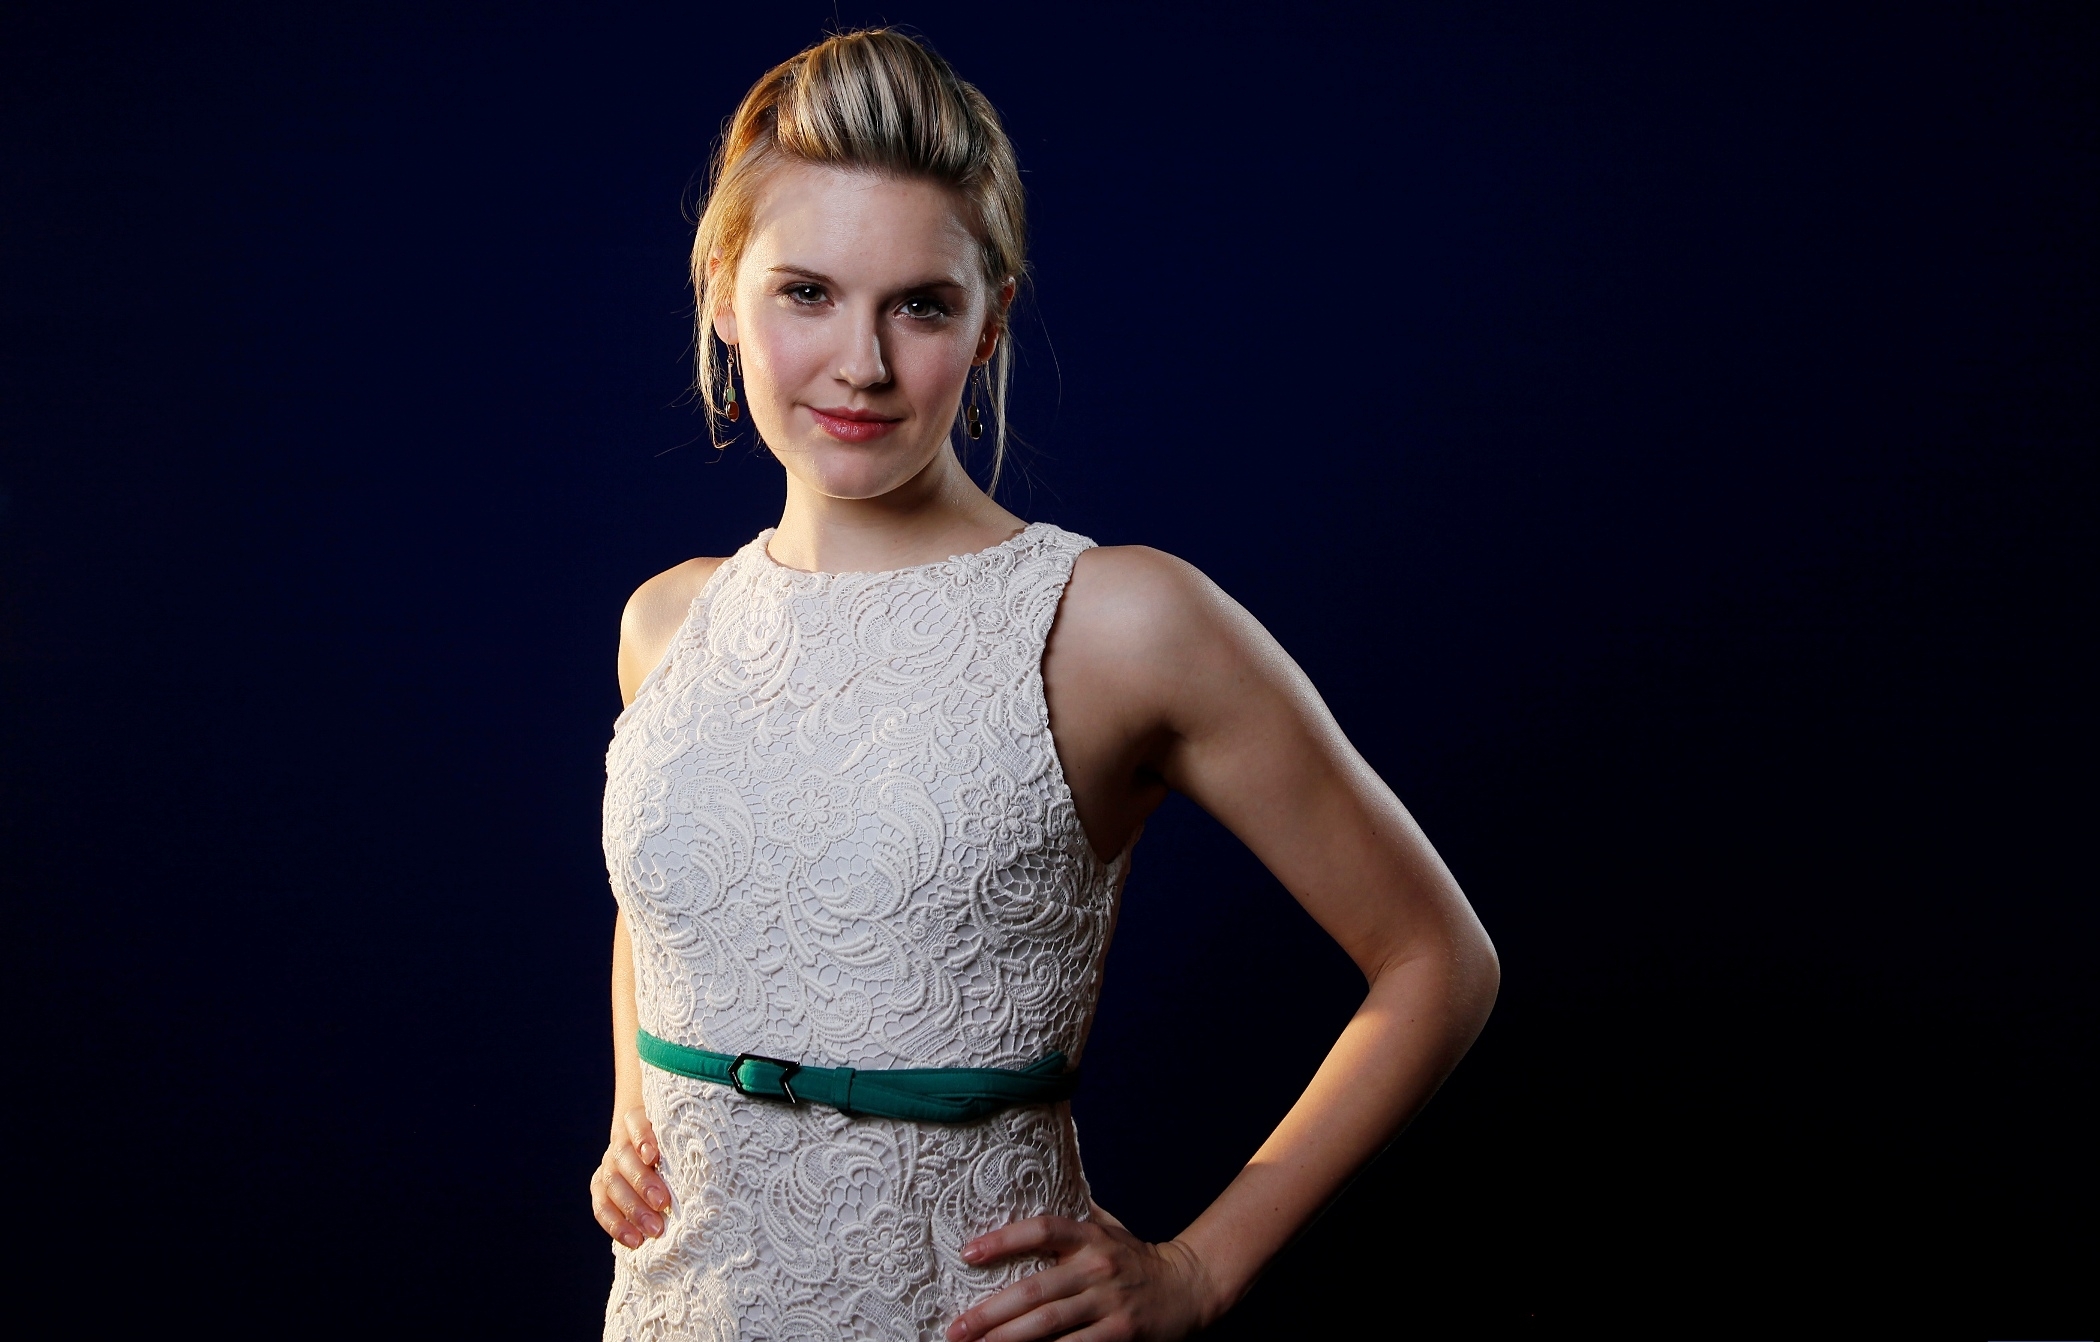 Maggie Grace Wallpapers Pictures Images HD Wallpapers Download Free Map Images Wallpaper [wallpaper376.blogspot.com]